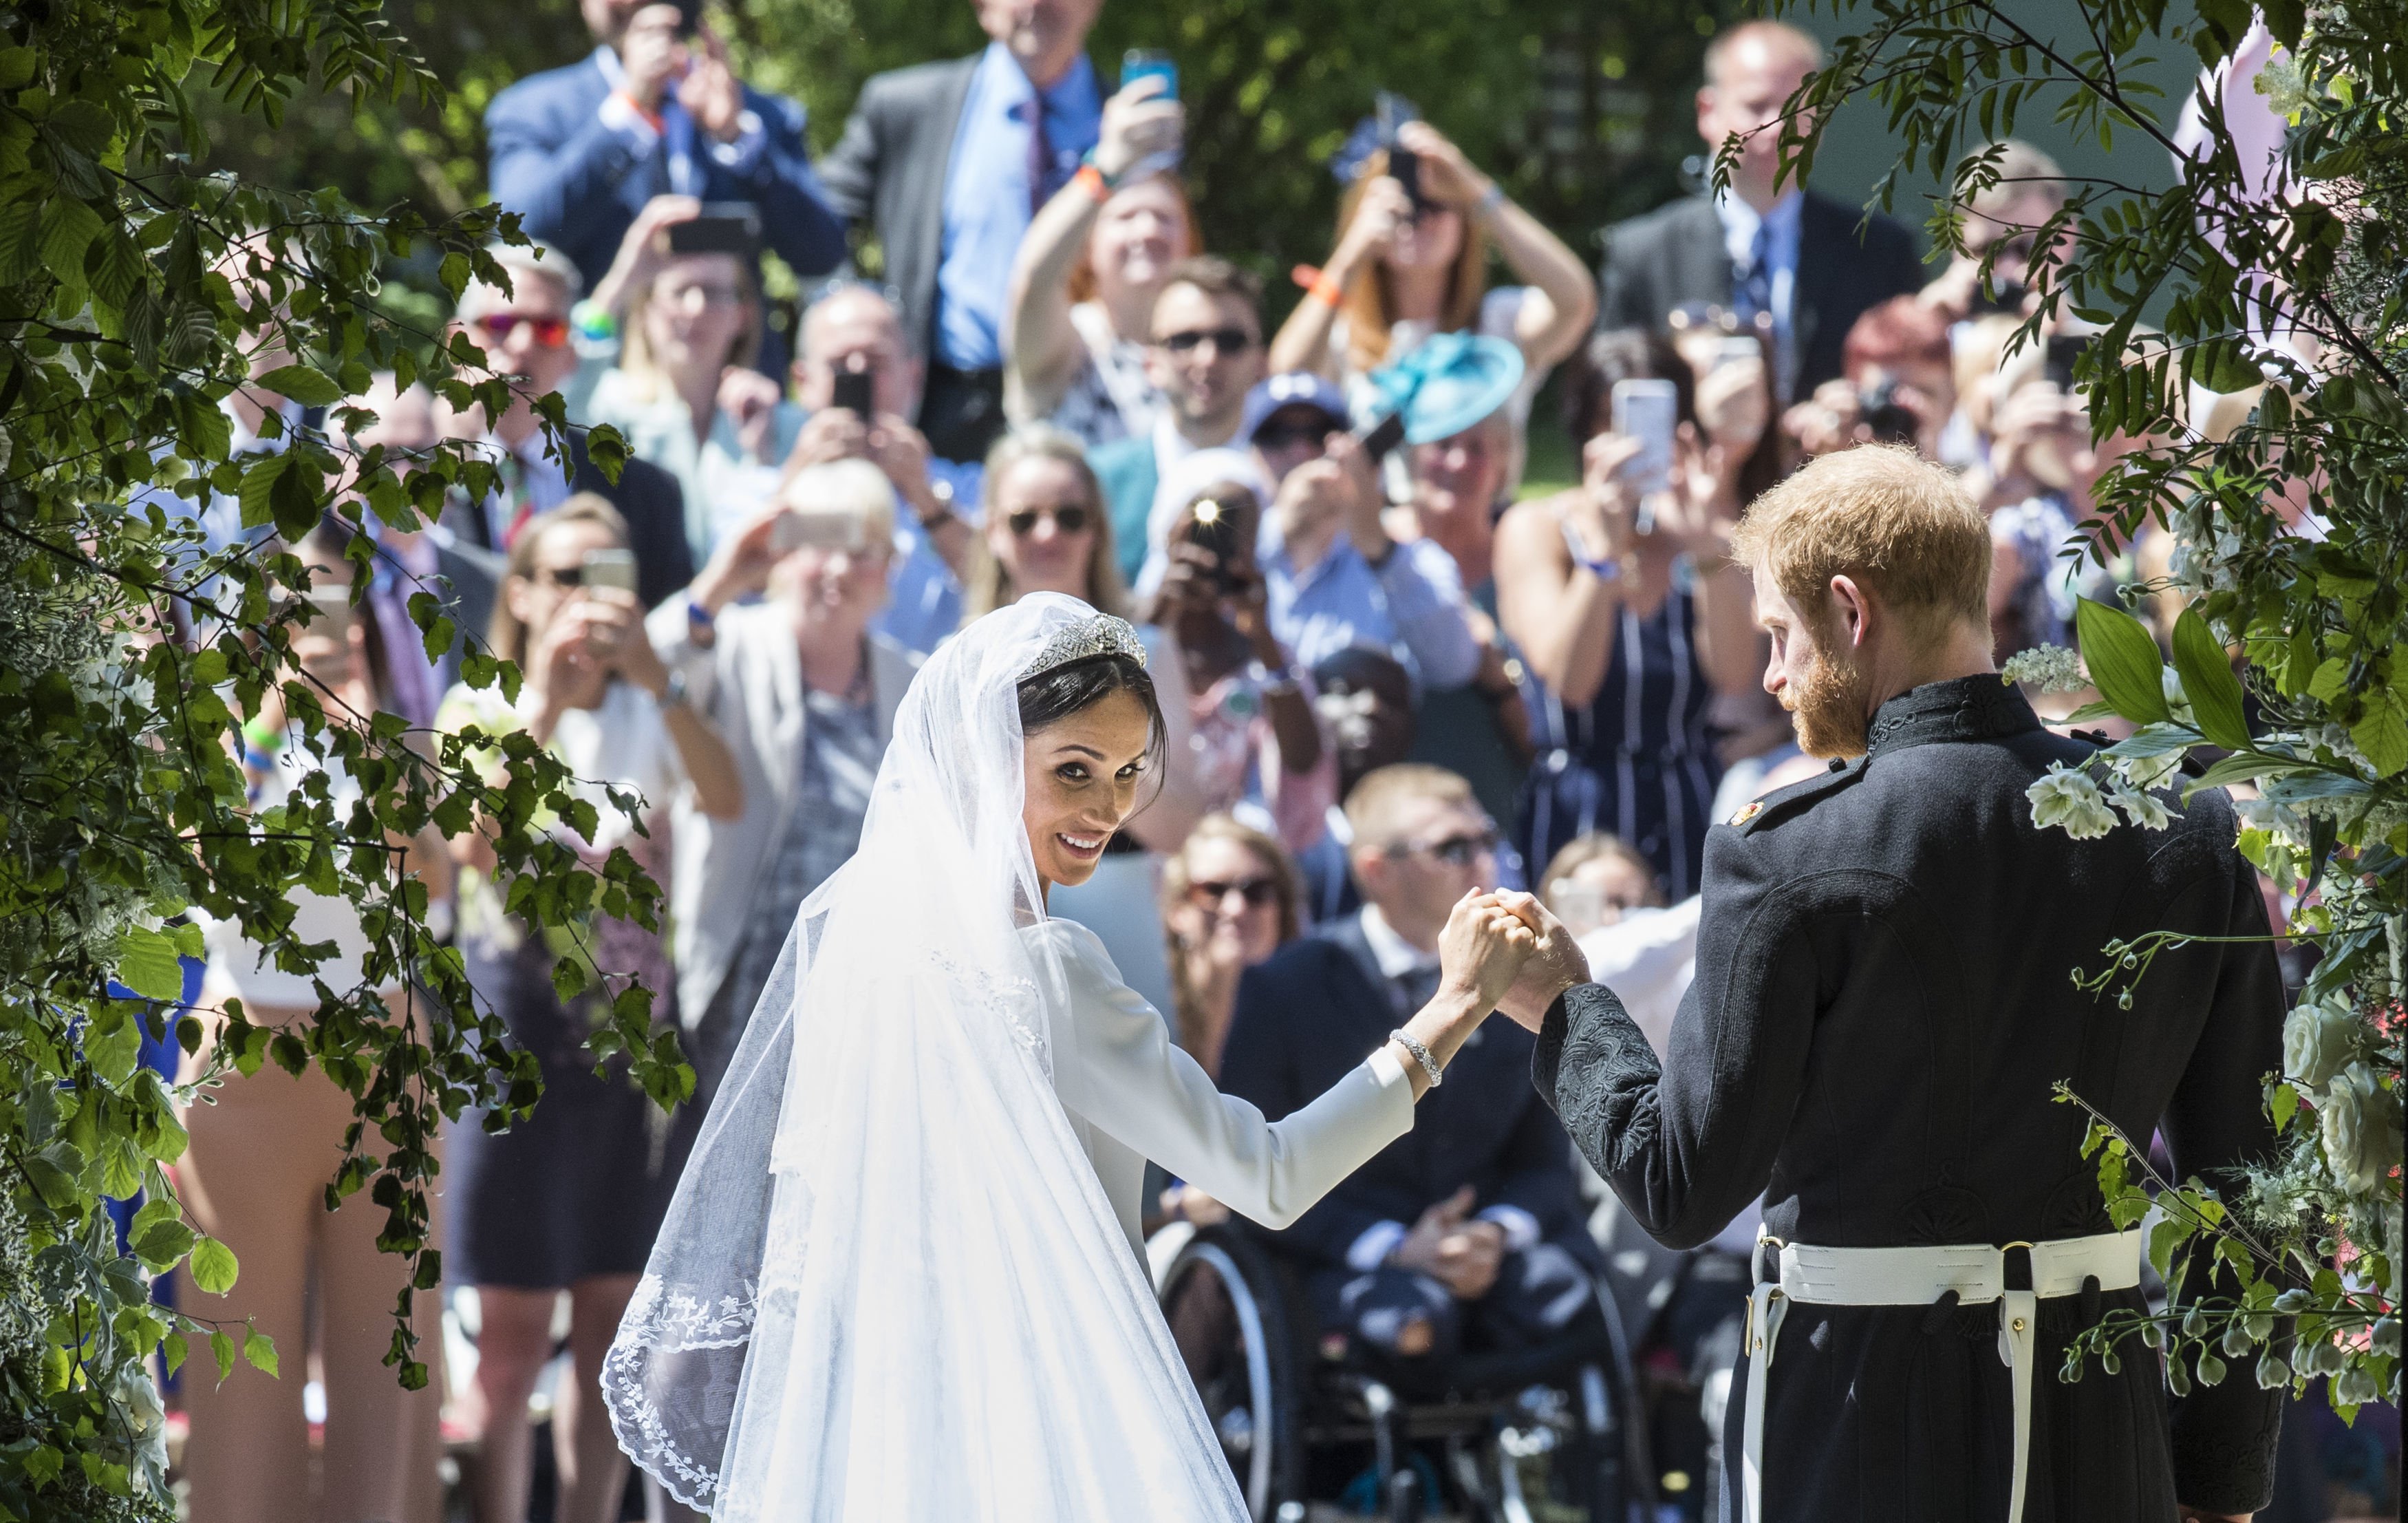 The Duke and Duchess of Sussex outside Windsor Castle after their wedding ceremony in St George's Chapel on May 19, 2018 in Windsor, England. | Source: Getty Images 